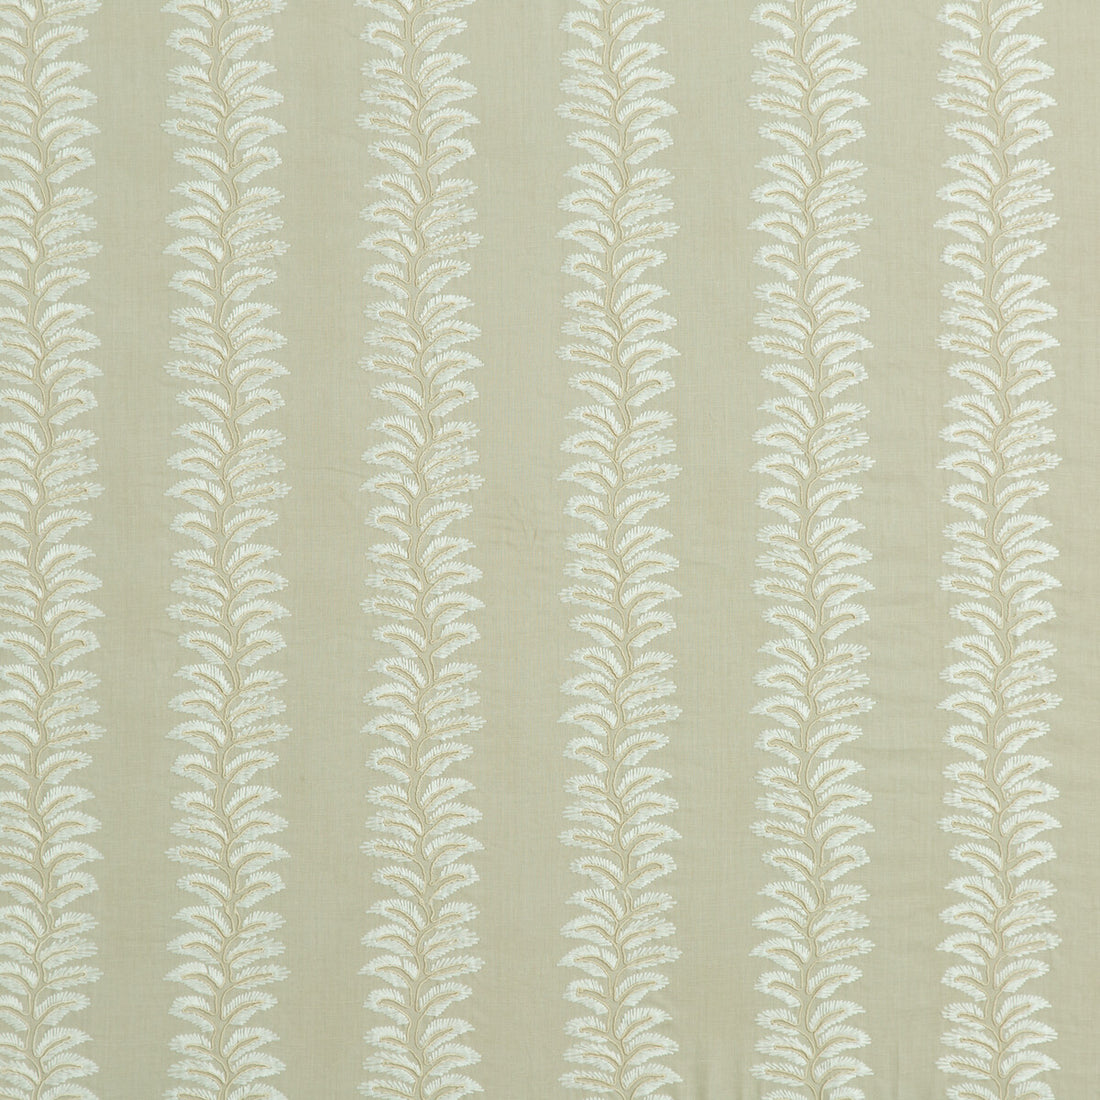 Bradbourne fabric in stone color - pattern BF10533.140.0 - by G P &amp; J Baker in the Langdale collection